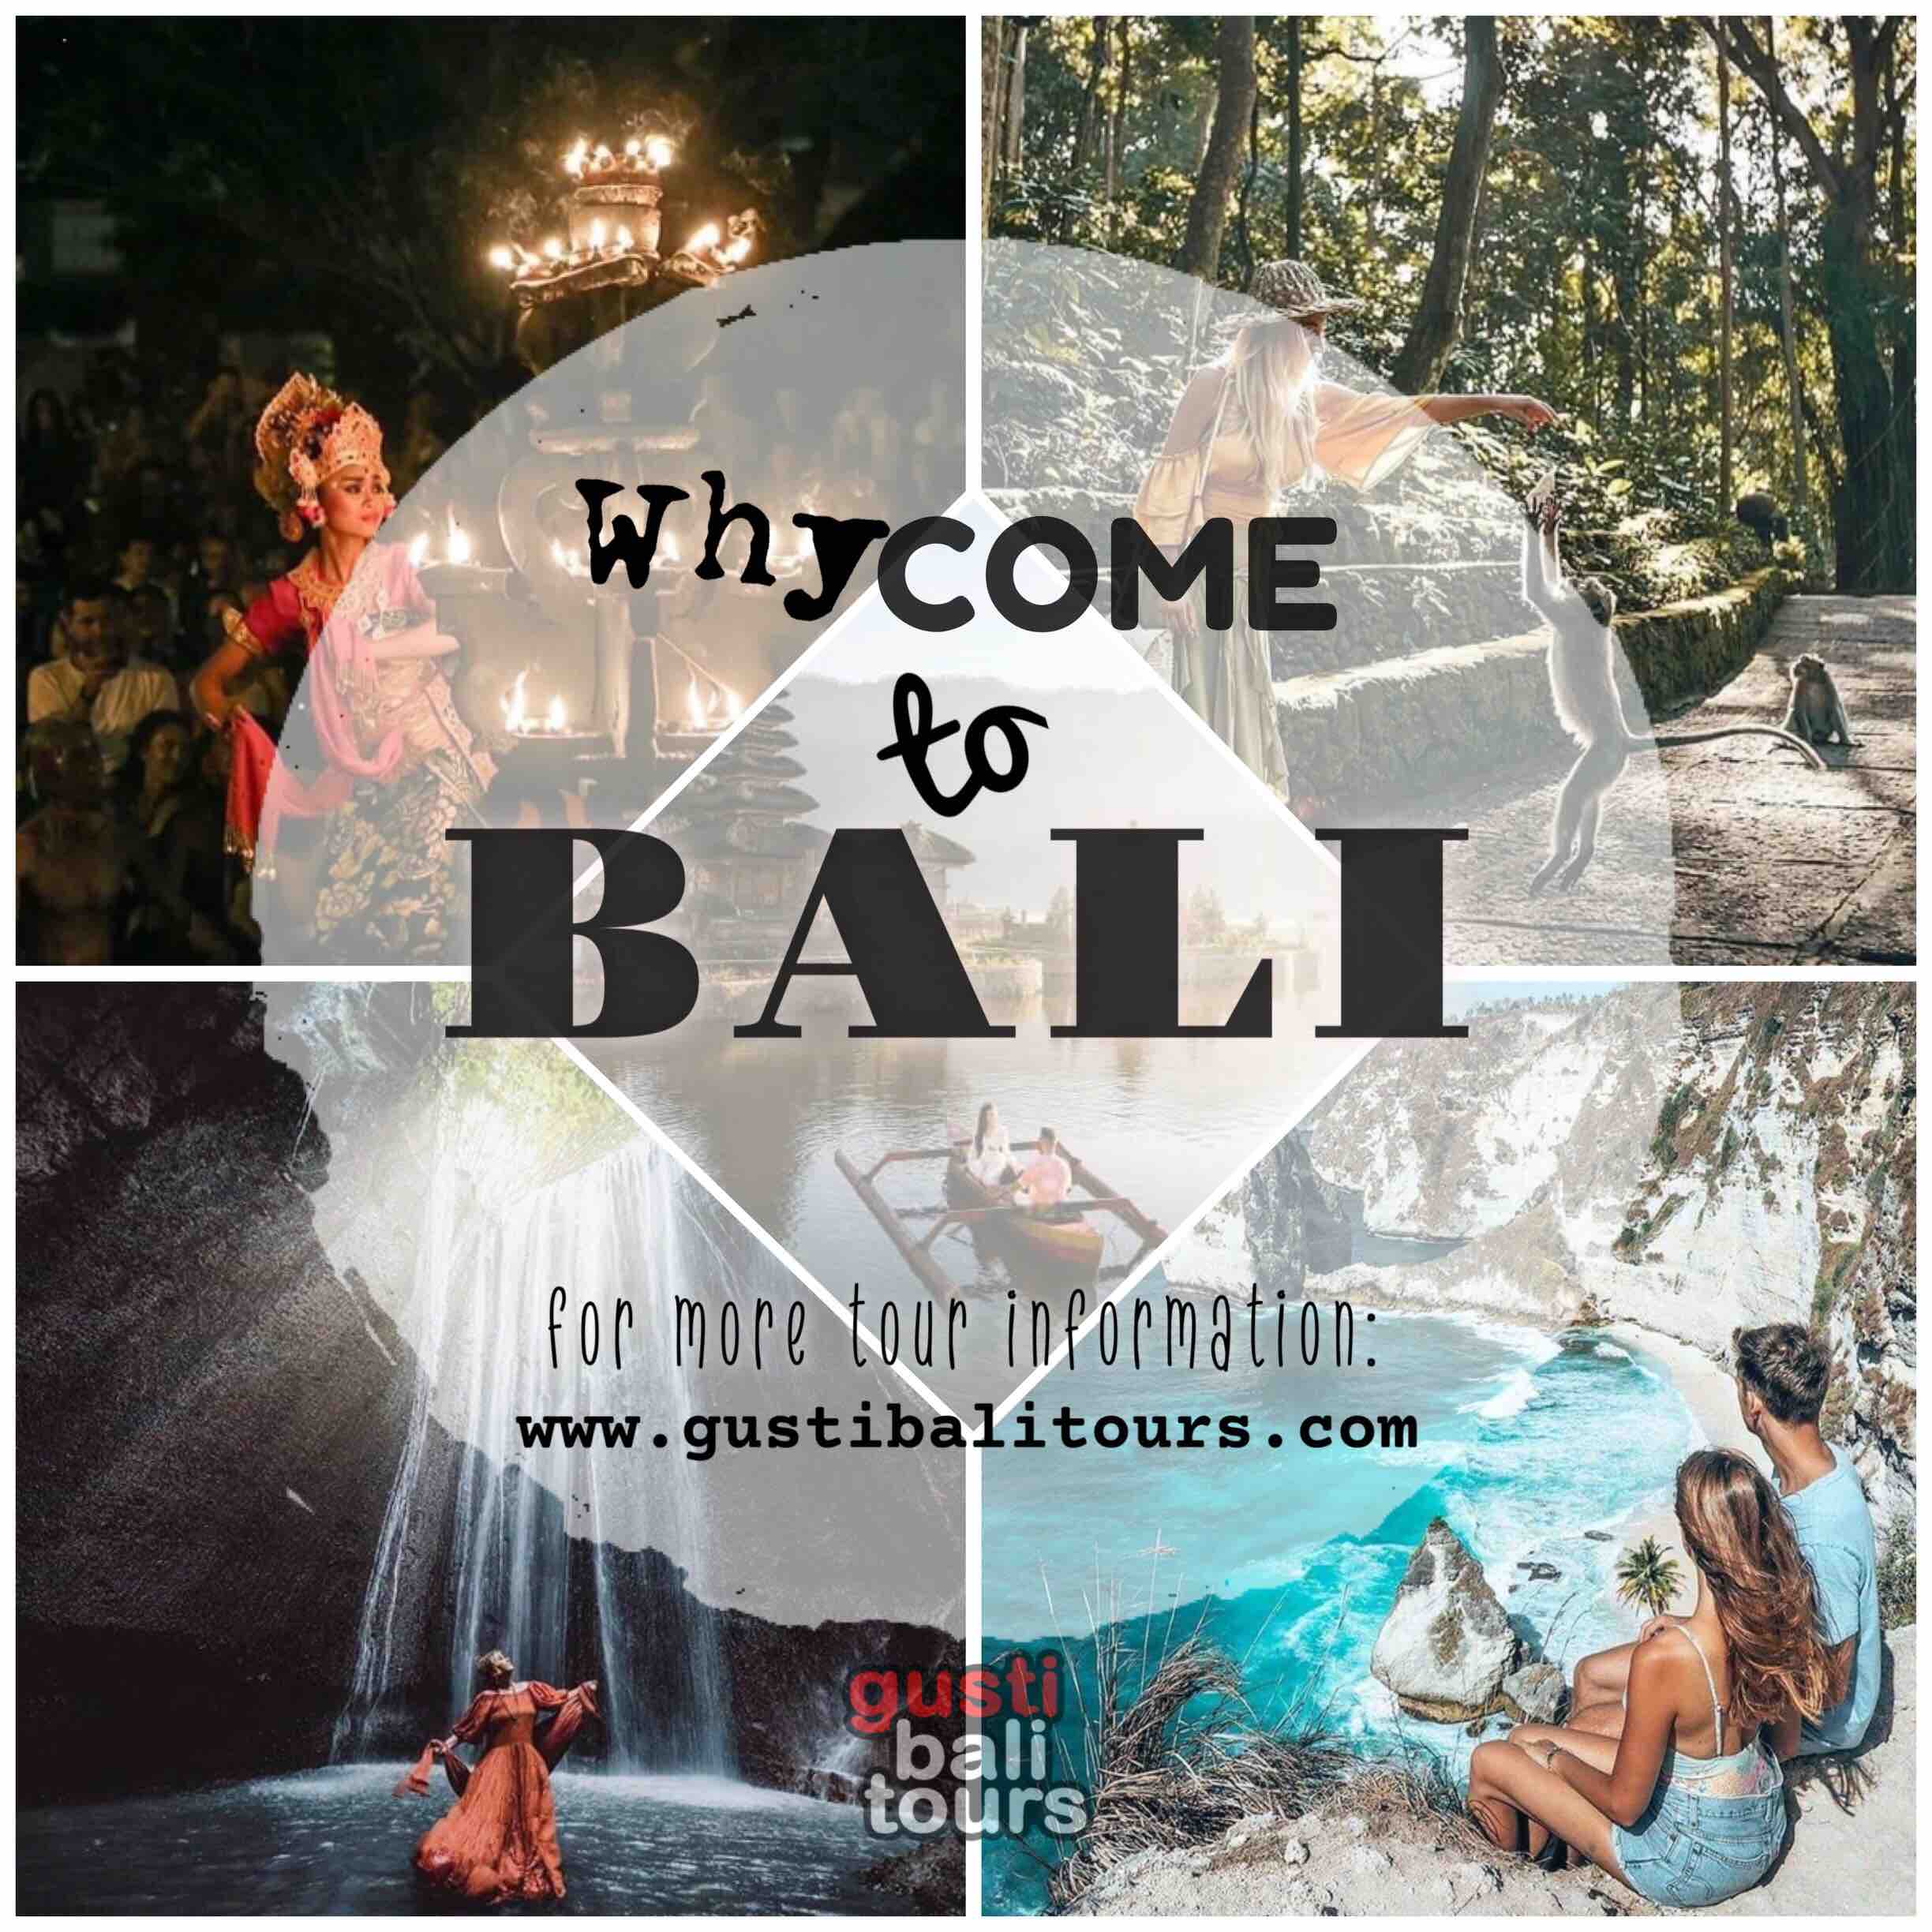 WhyCome to Bali